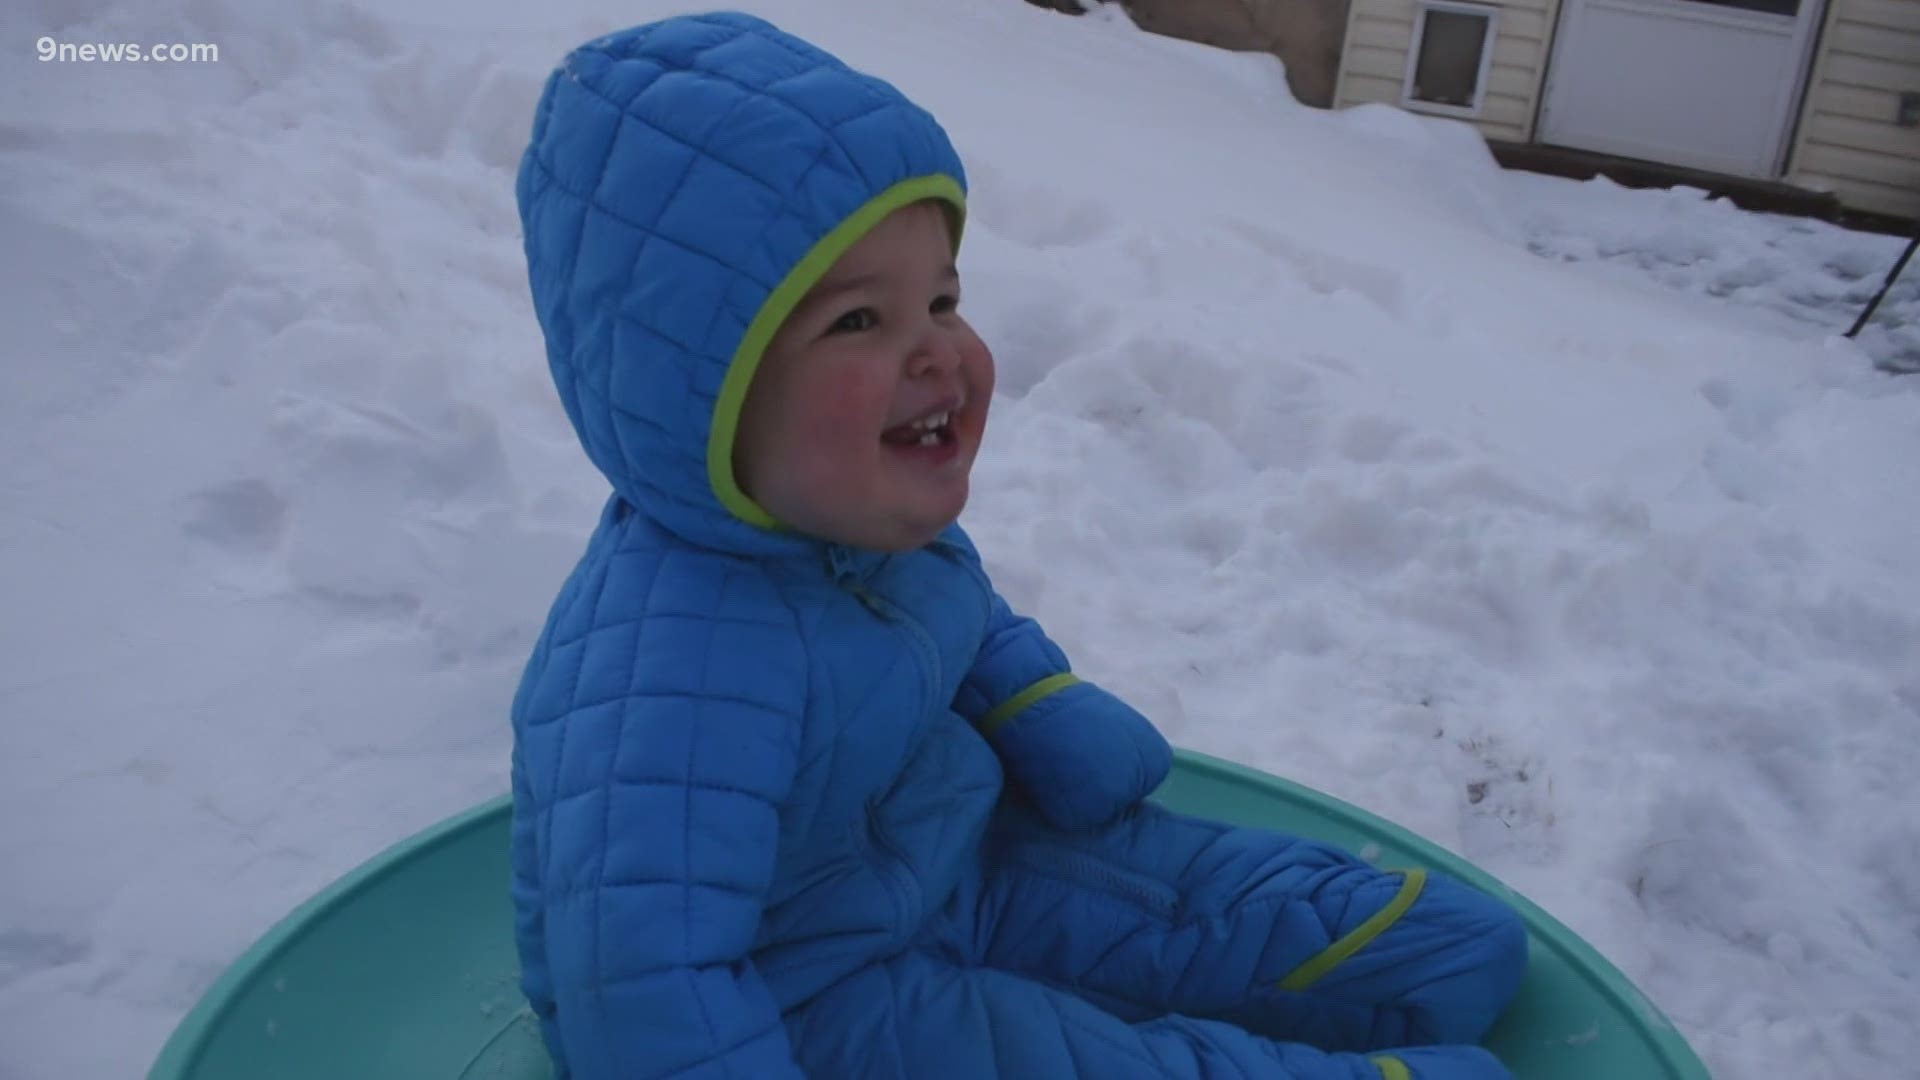 Philip got to experience the joy of sledding for the very first time on Wednesday.